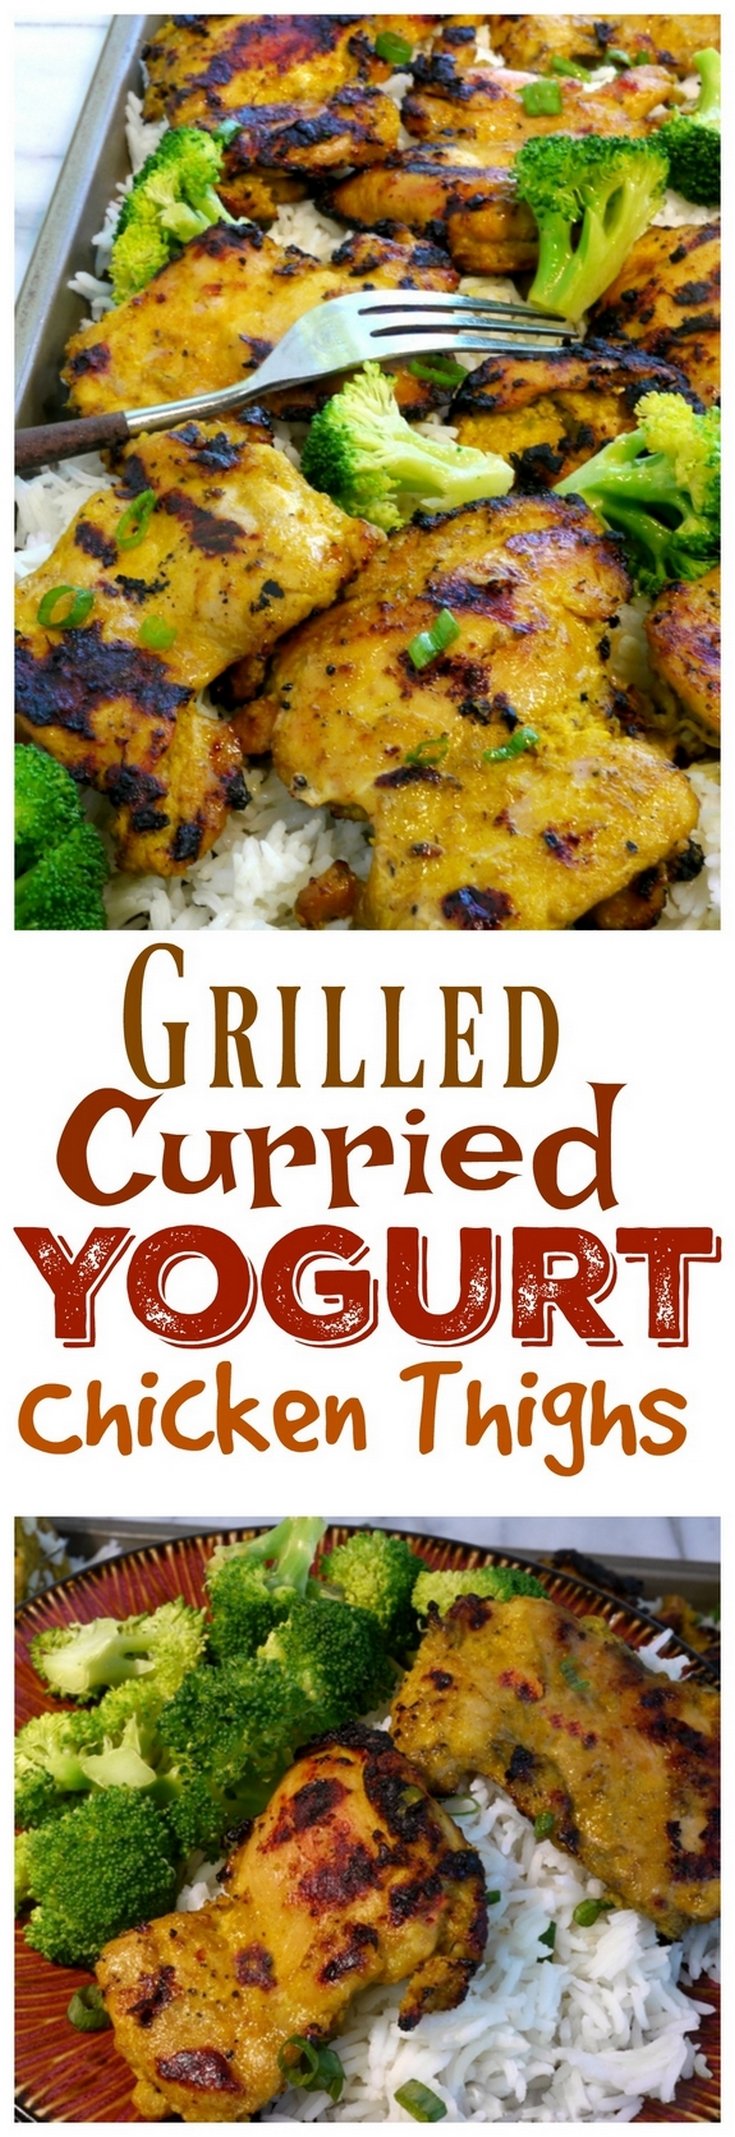 Jazz up your chicken with these Grilled Curried Yogurt Chicken Thighs. They add a new dimension and look to your regular grilled chicken recipe. Give it a try this week, from NoblePig.com. via @cmpollak1